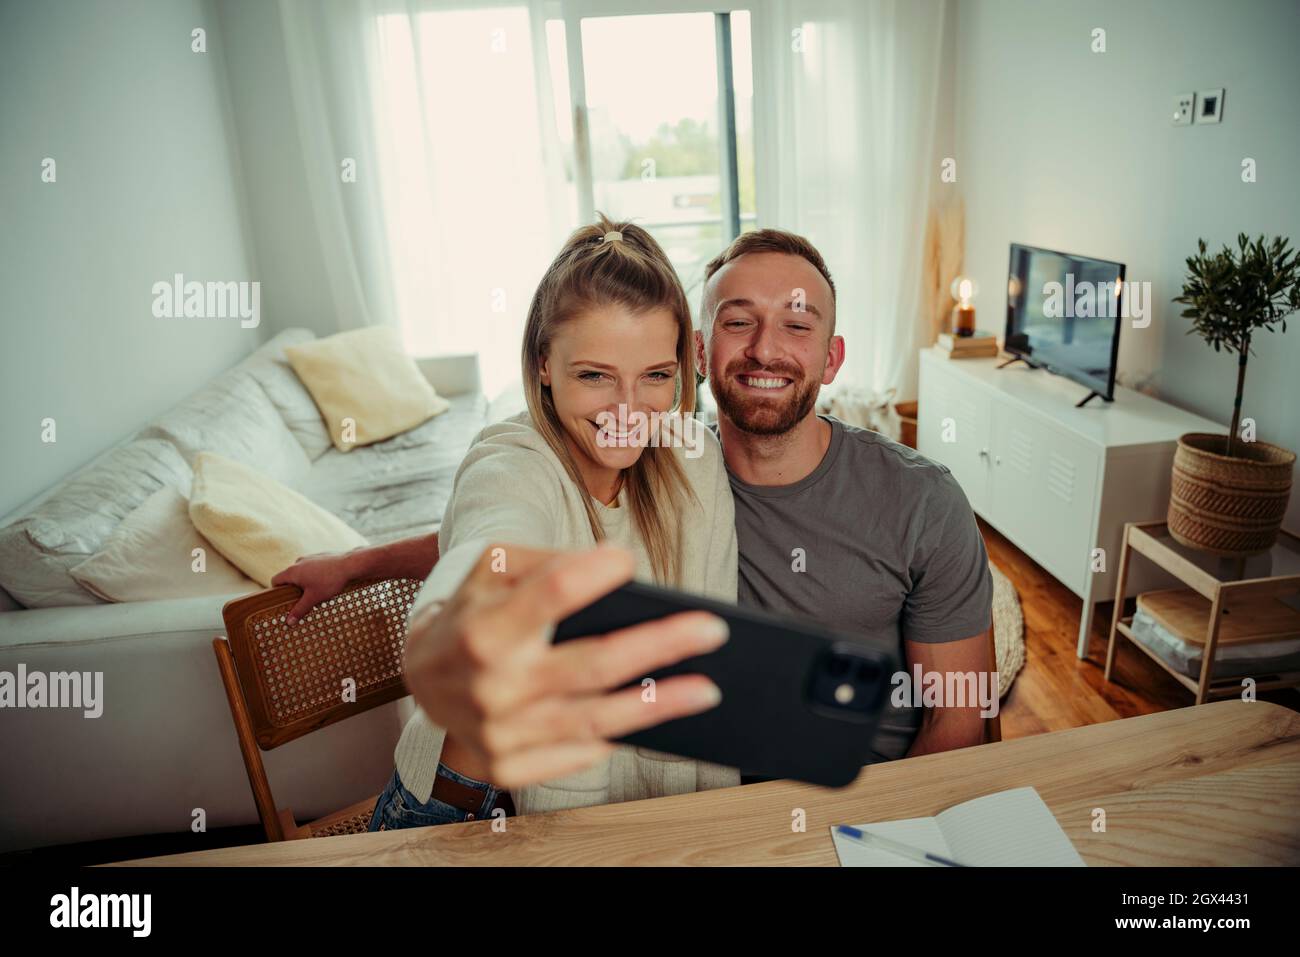 Caucasian couple taking selfie at kitchen table with cellular device Stock Photo